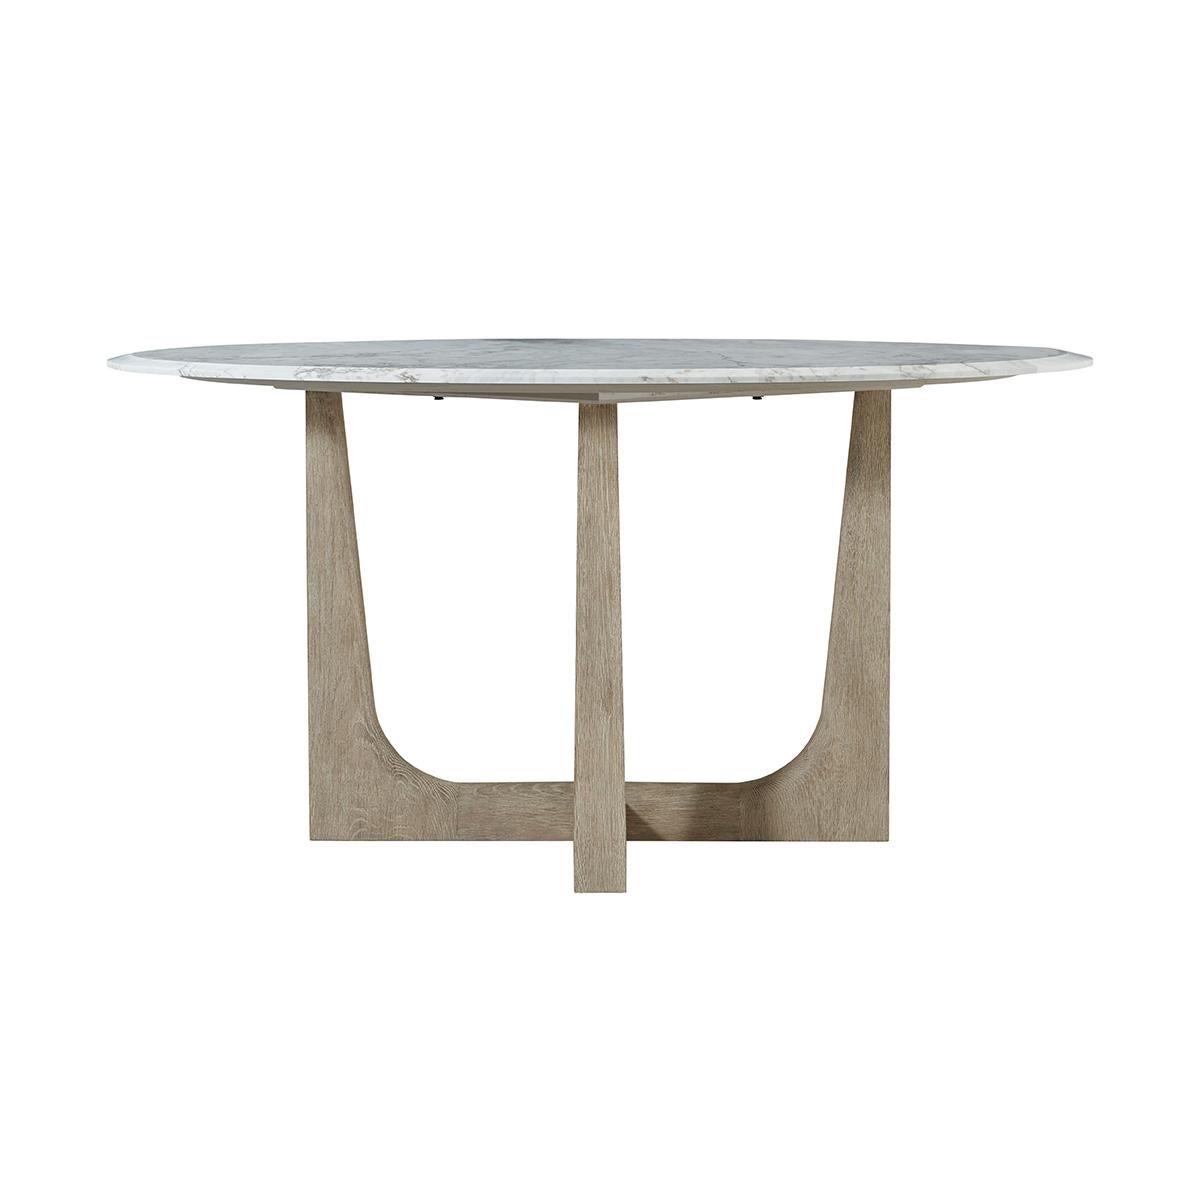 Vietnamese Light Oak and Marble Round Dining Table For Sale